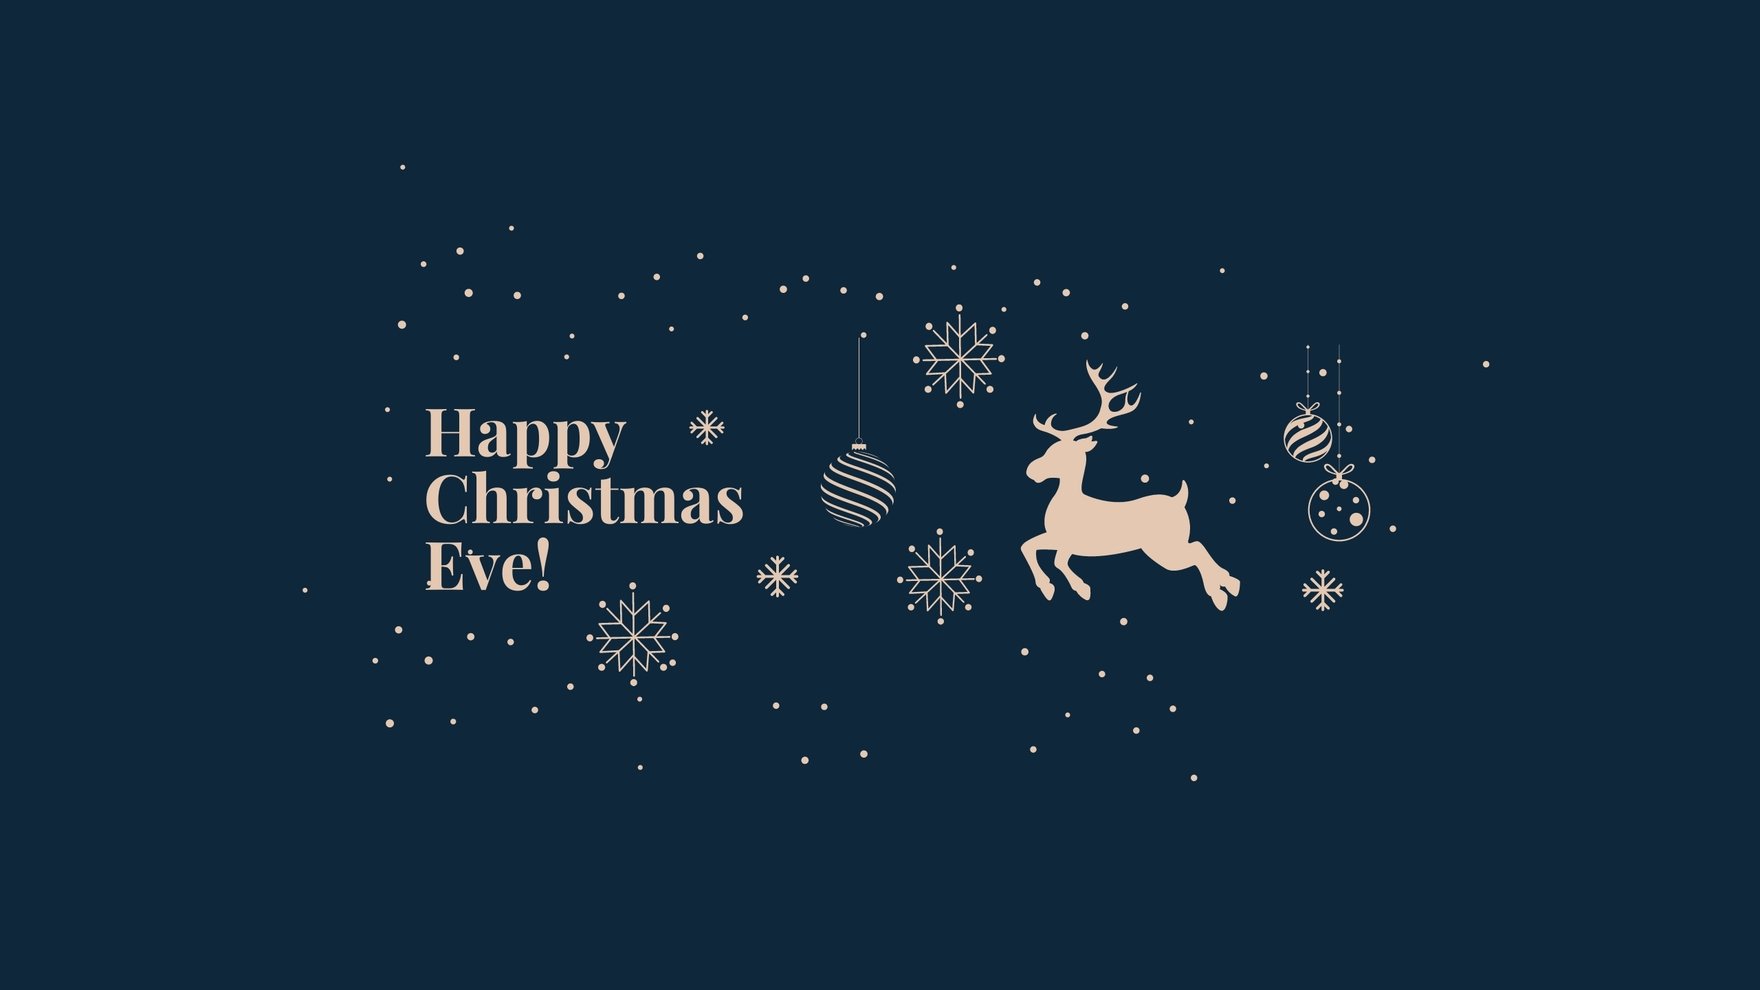 Christmas Eve YouTube Banner Template